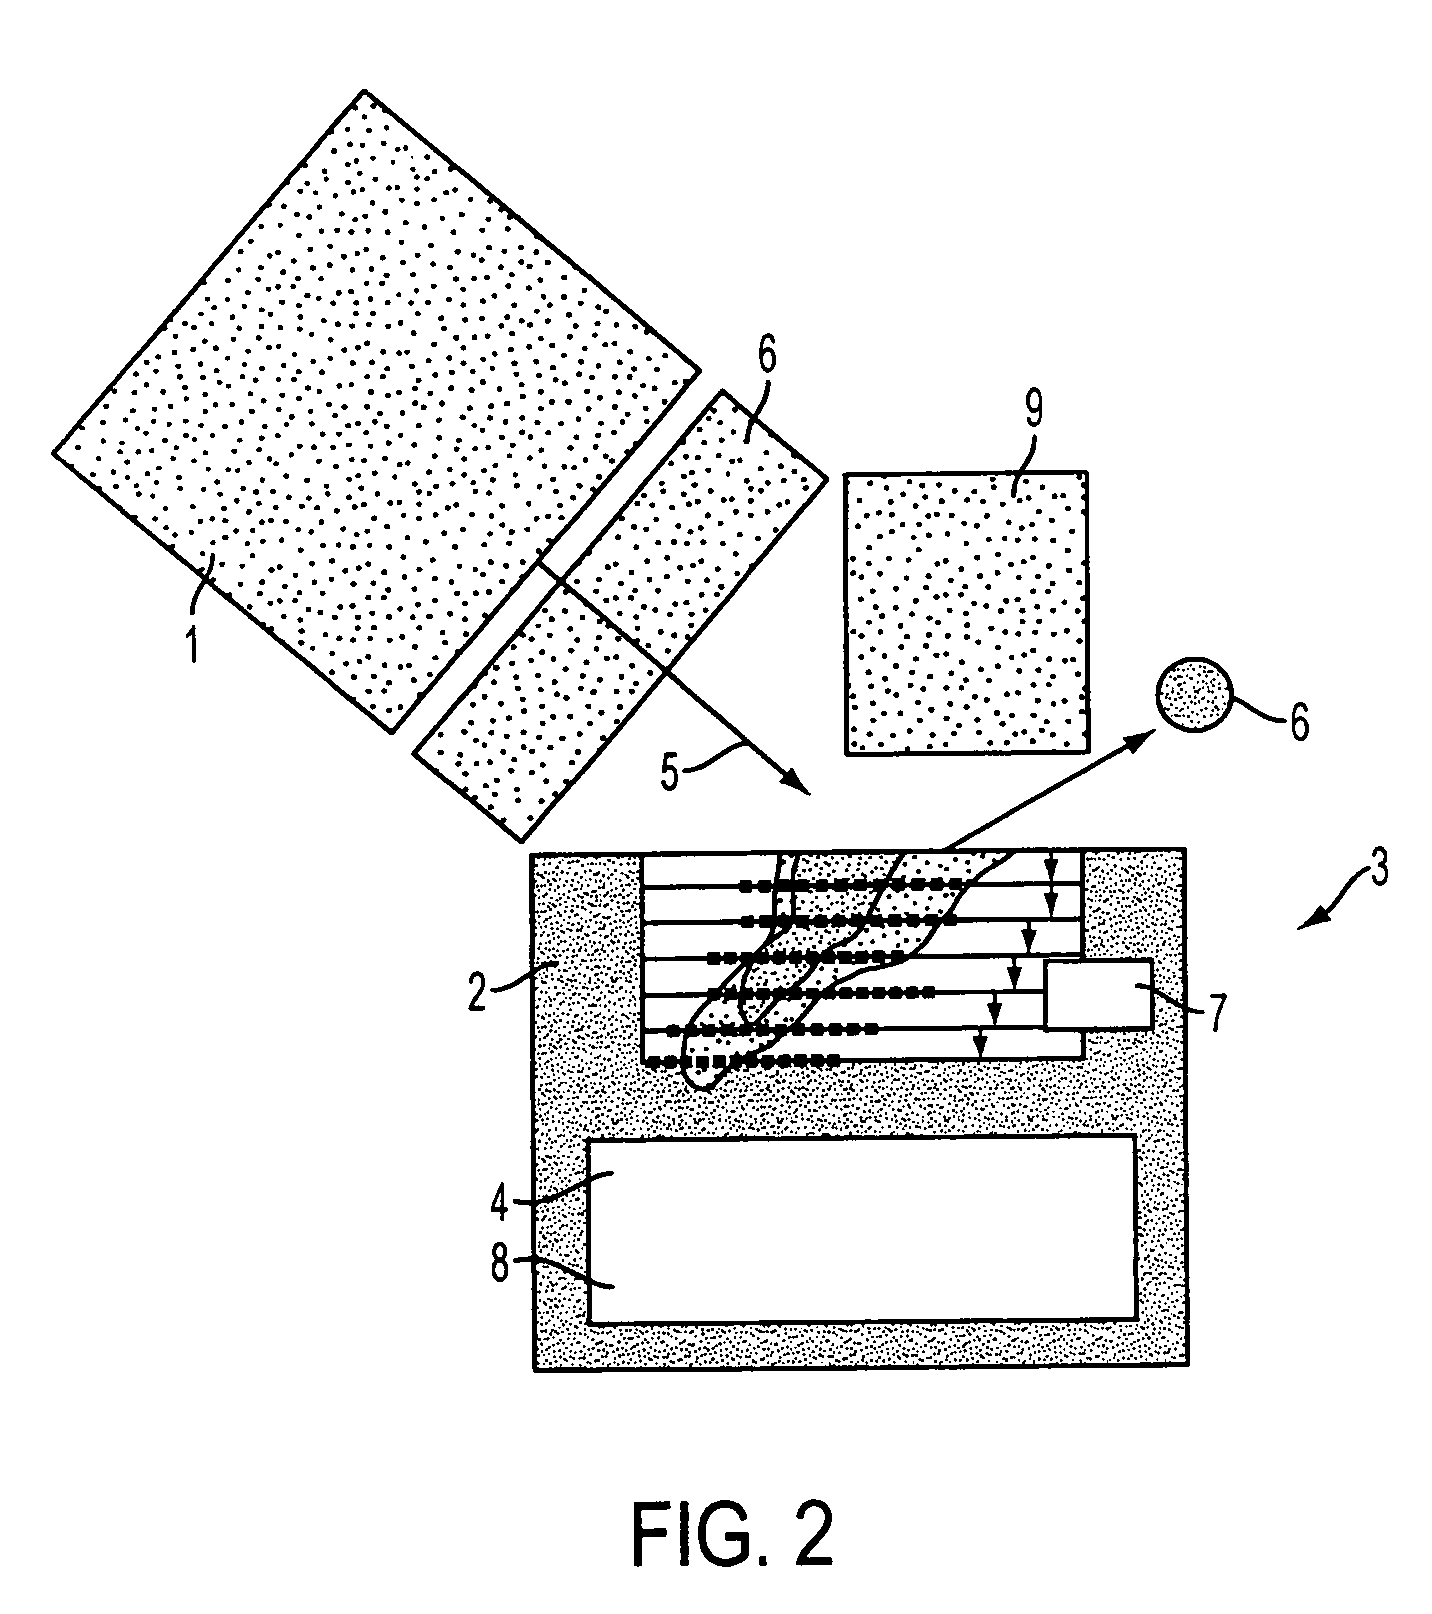 Method of an ultra-short femtosecond pulse and KW class high average-power laser for preventing cold-worked stress corrosion cracking in iron steels and alloyed steel including stainless steels